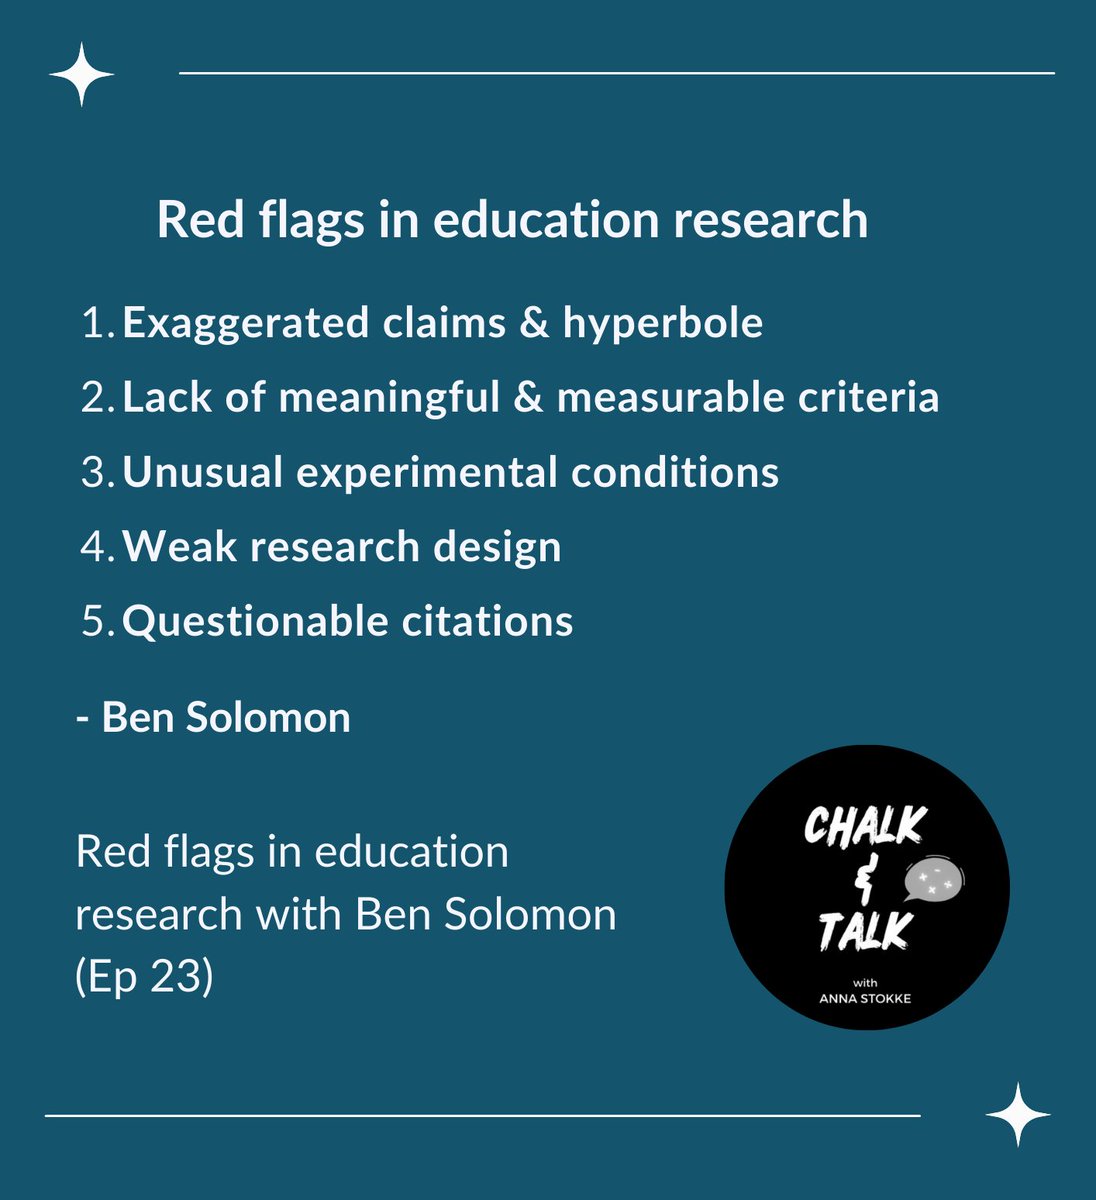 1/4 In my latest episode we discuss tools for critically evaluating education claims. My guest shared 5 red flags to be on the lookout for in education research. Link to podcast episode & more info on the red flags below.